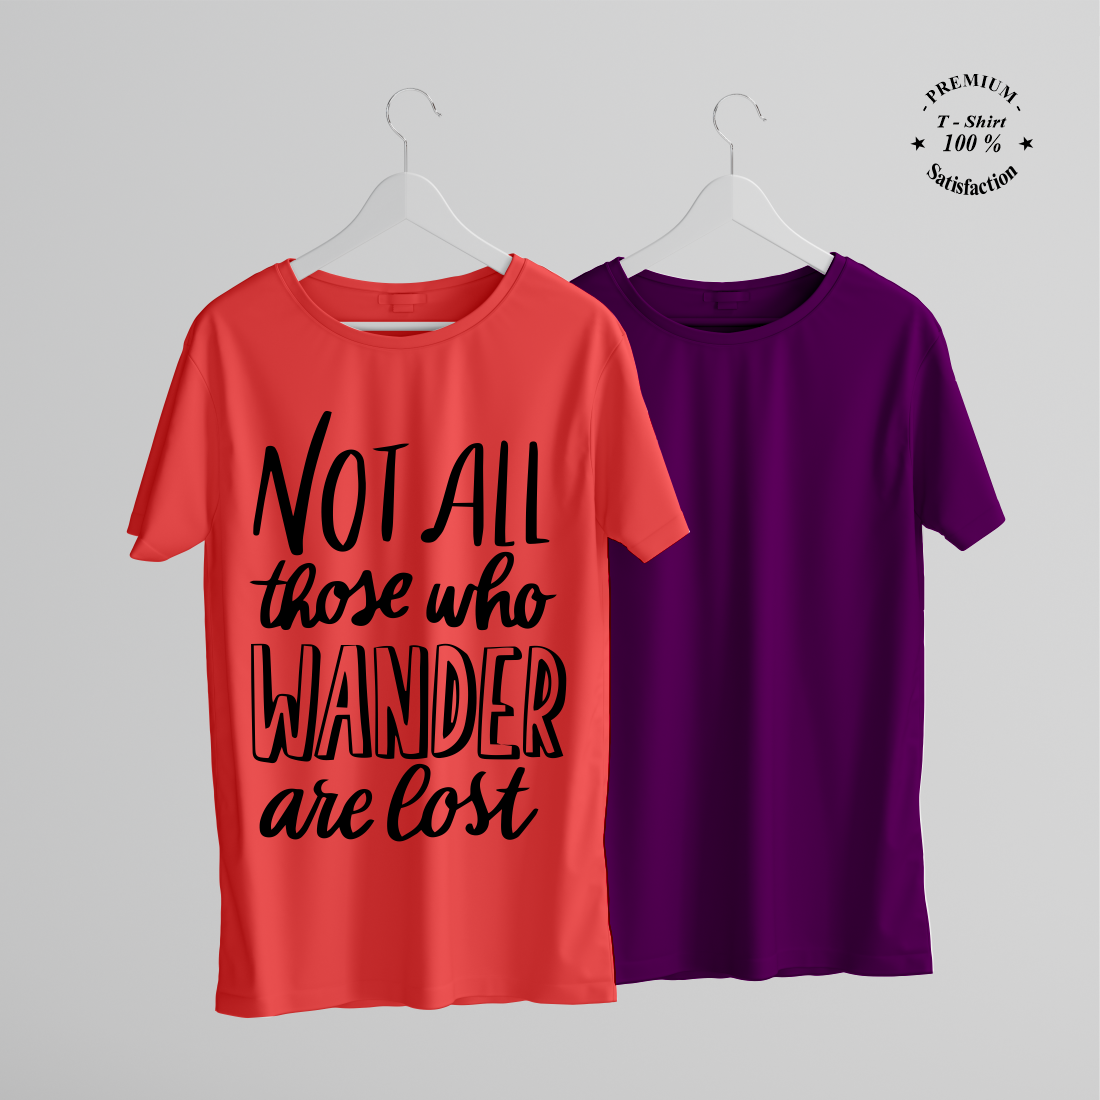 NOT ALL THOSE WHO WANDER LOST PRINTED T-SHIRTS